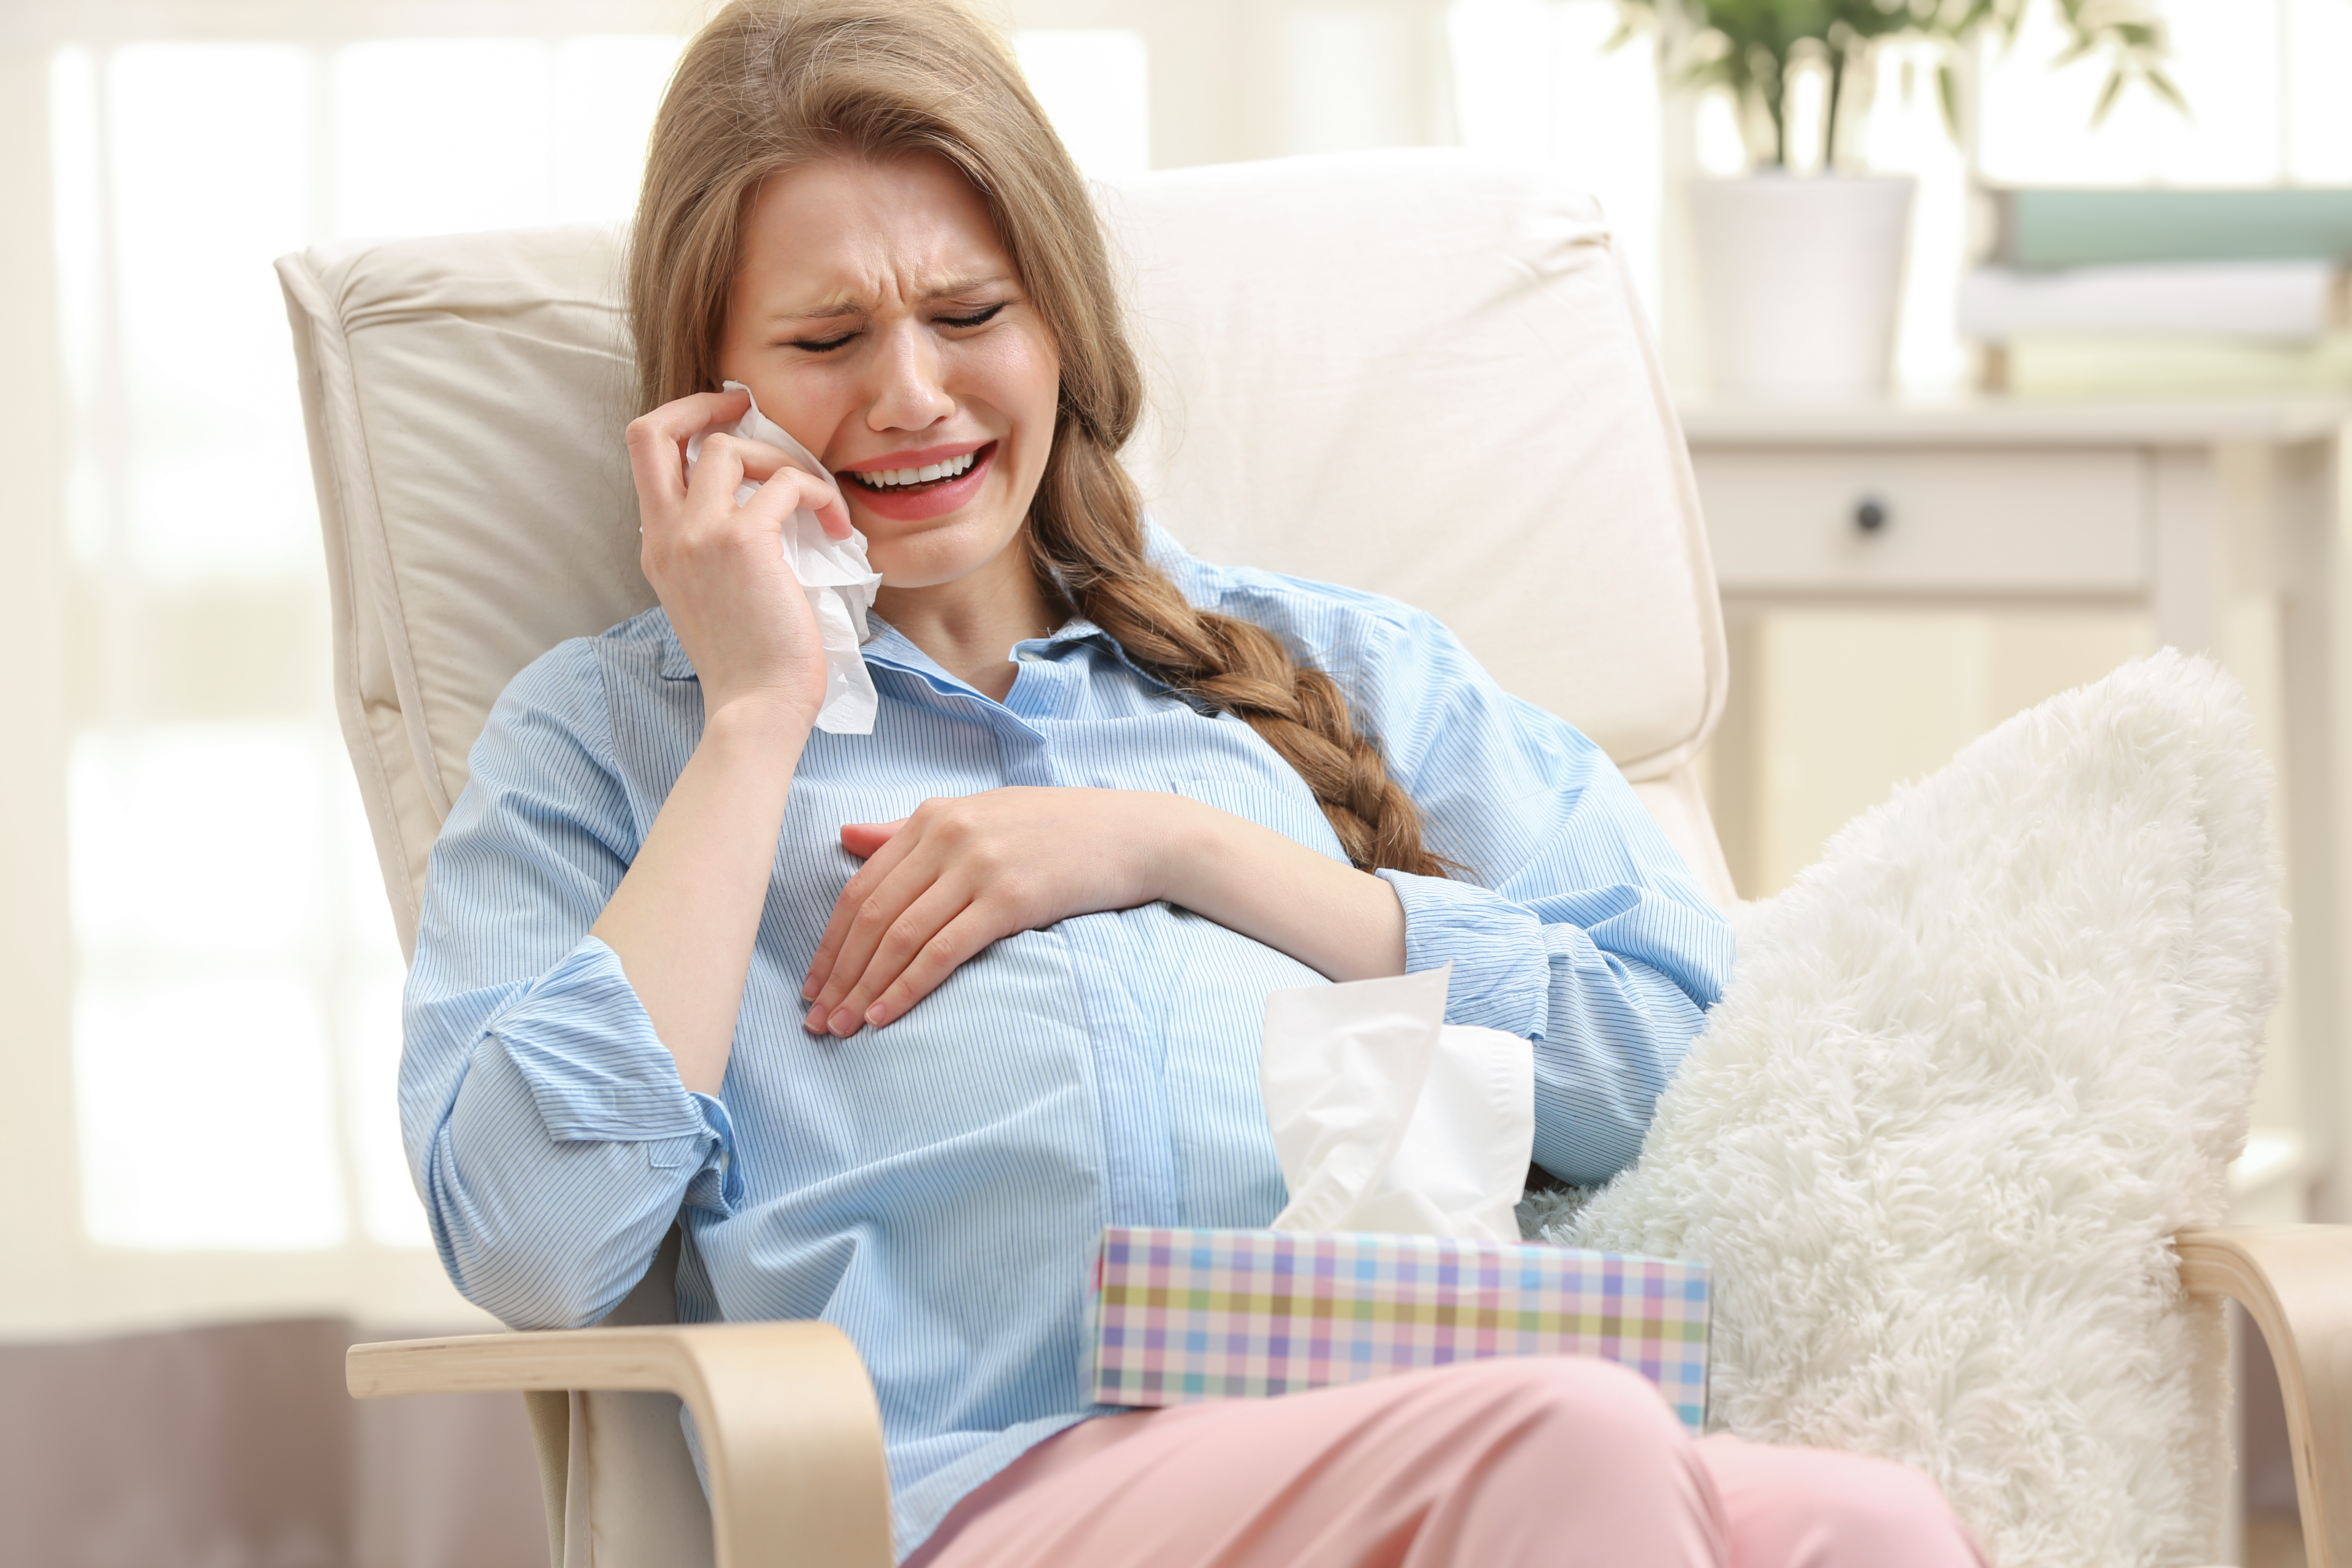 A crying pregnant woman | Source: Shutterstock